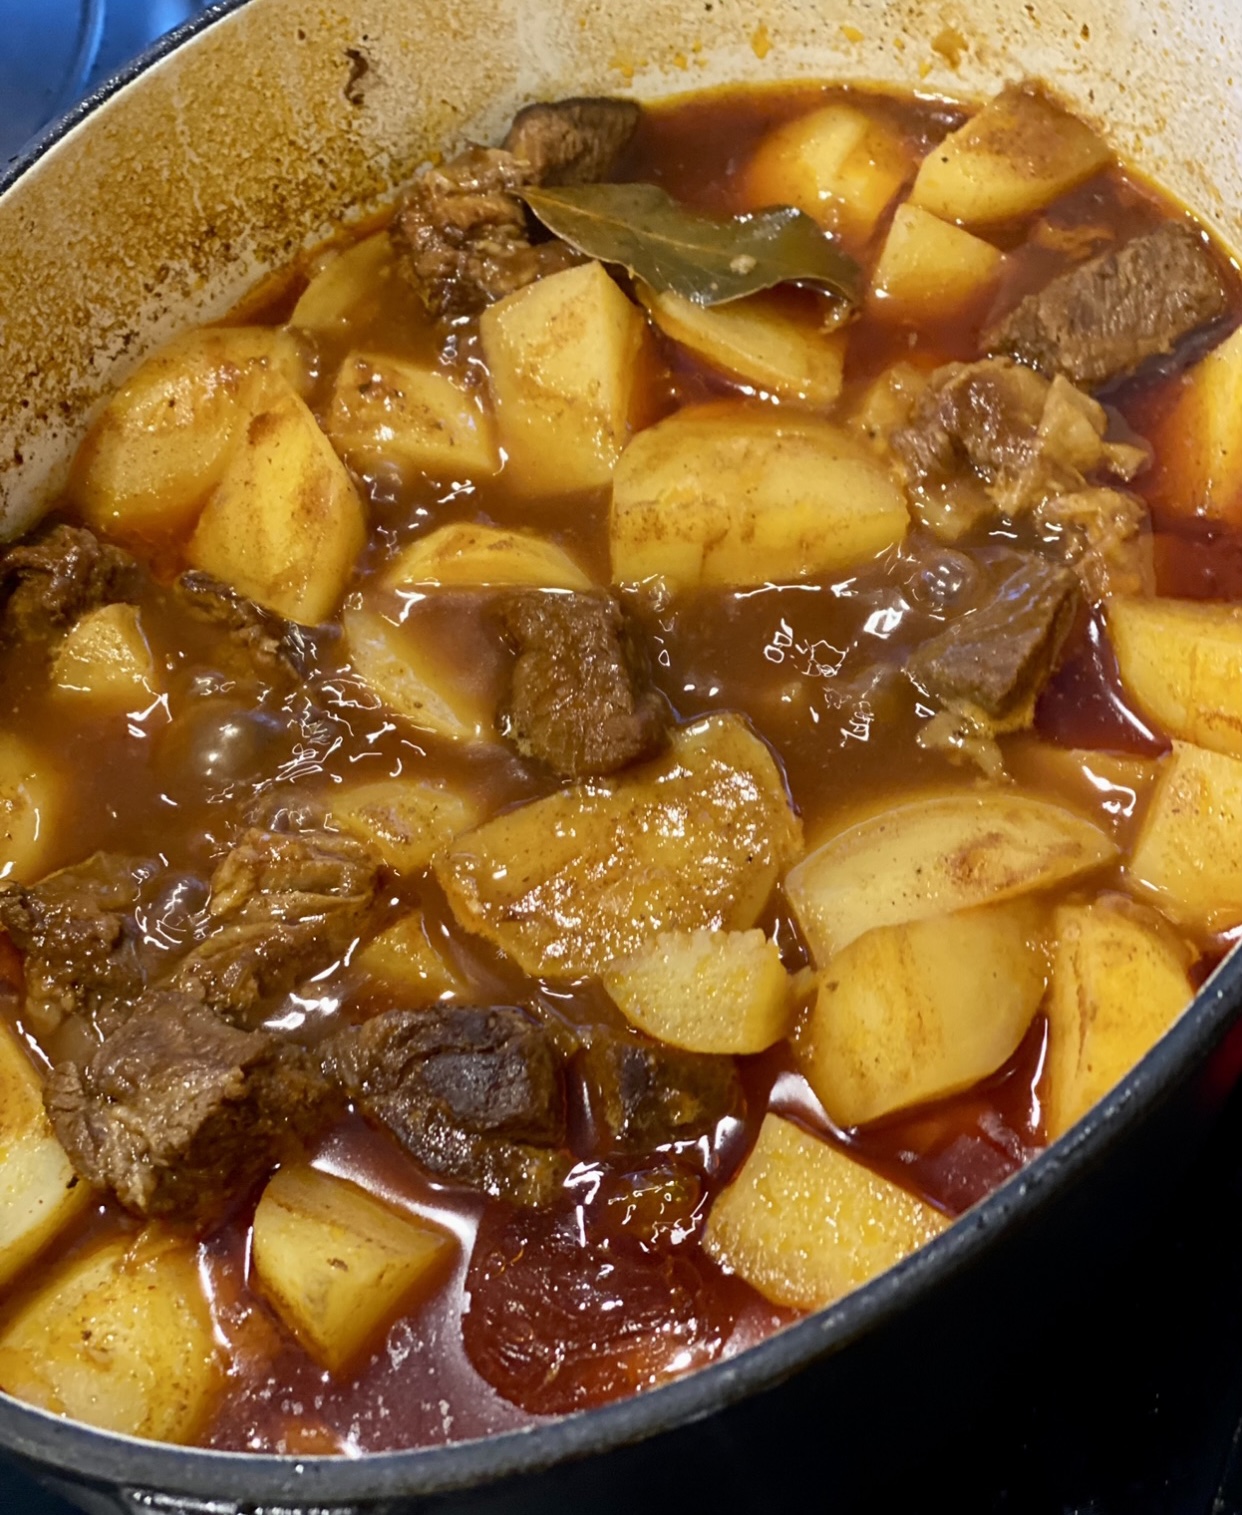 Beef and Potato Stew